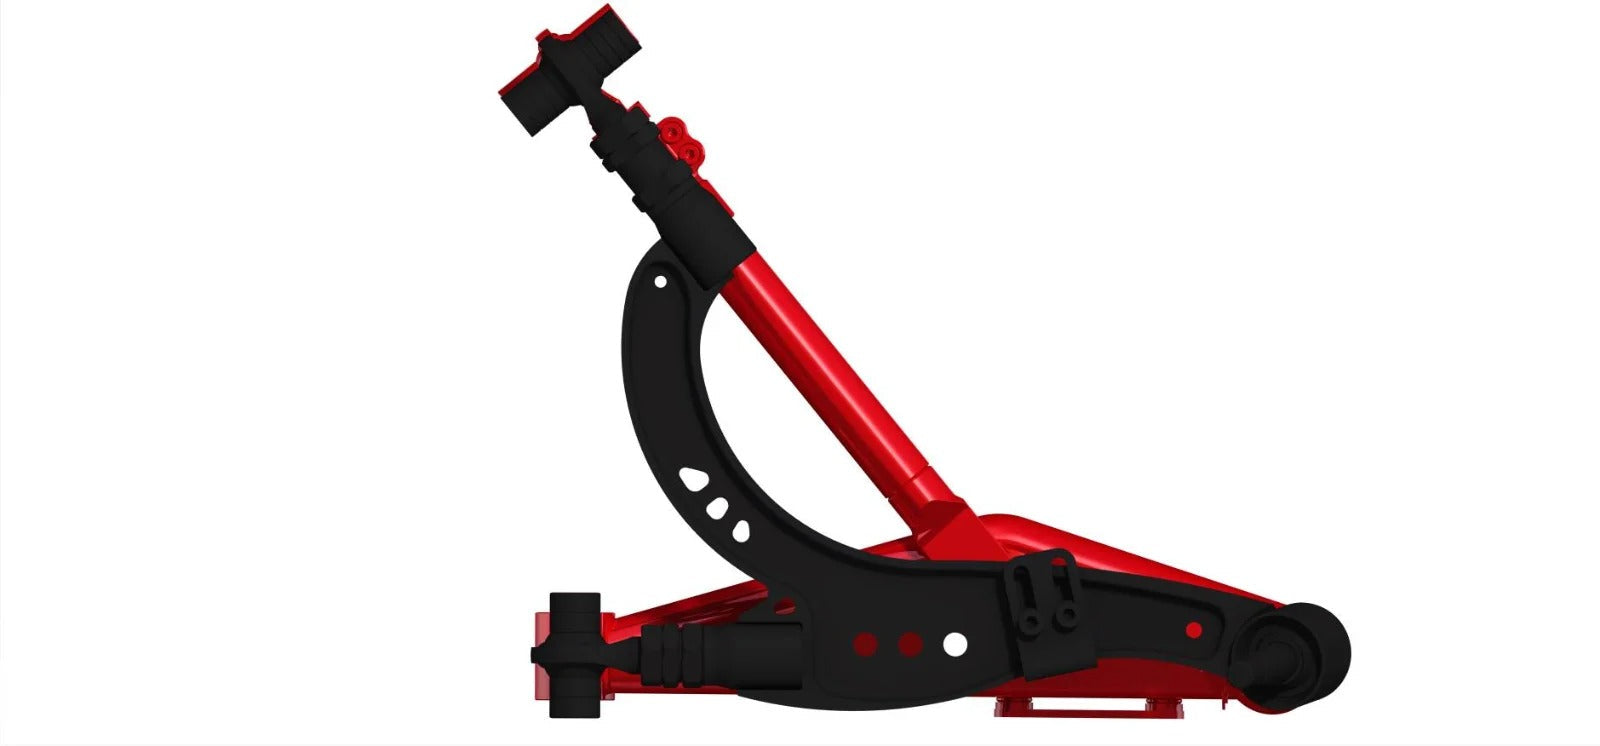 240sx/Skyline front Super Lock Lower Control Arms (FLCA's)